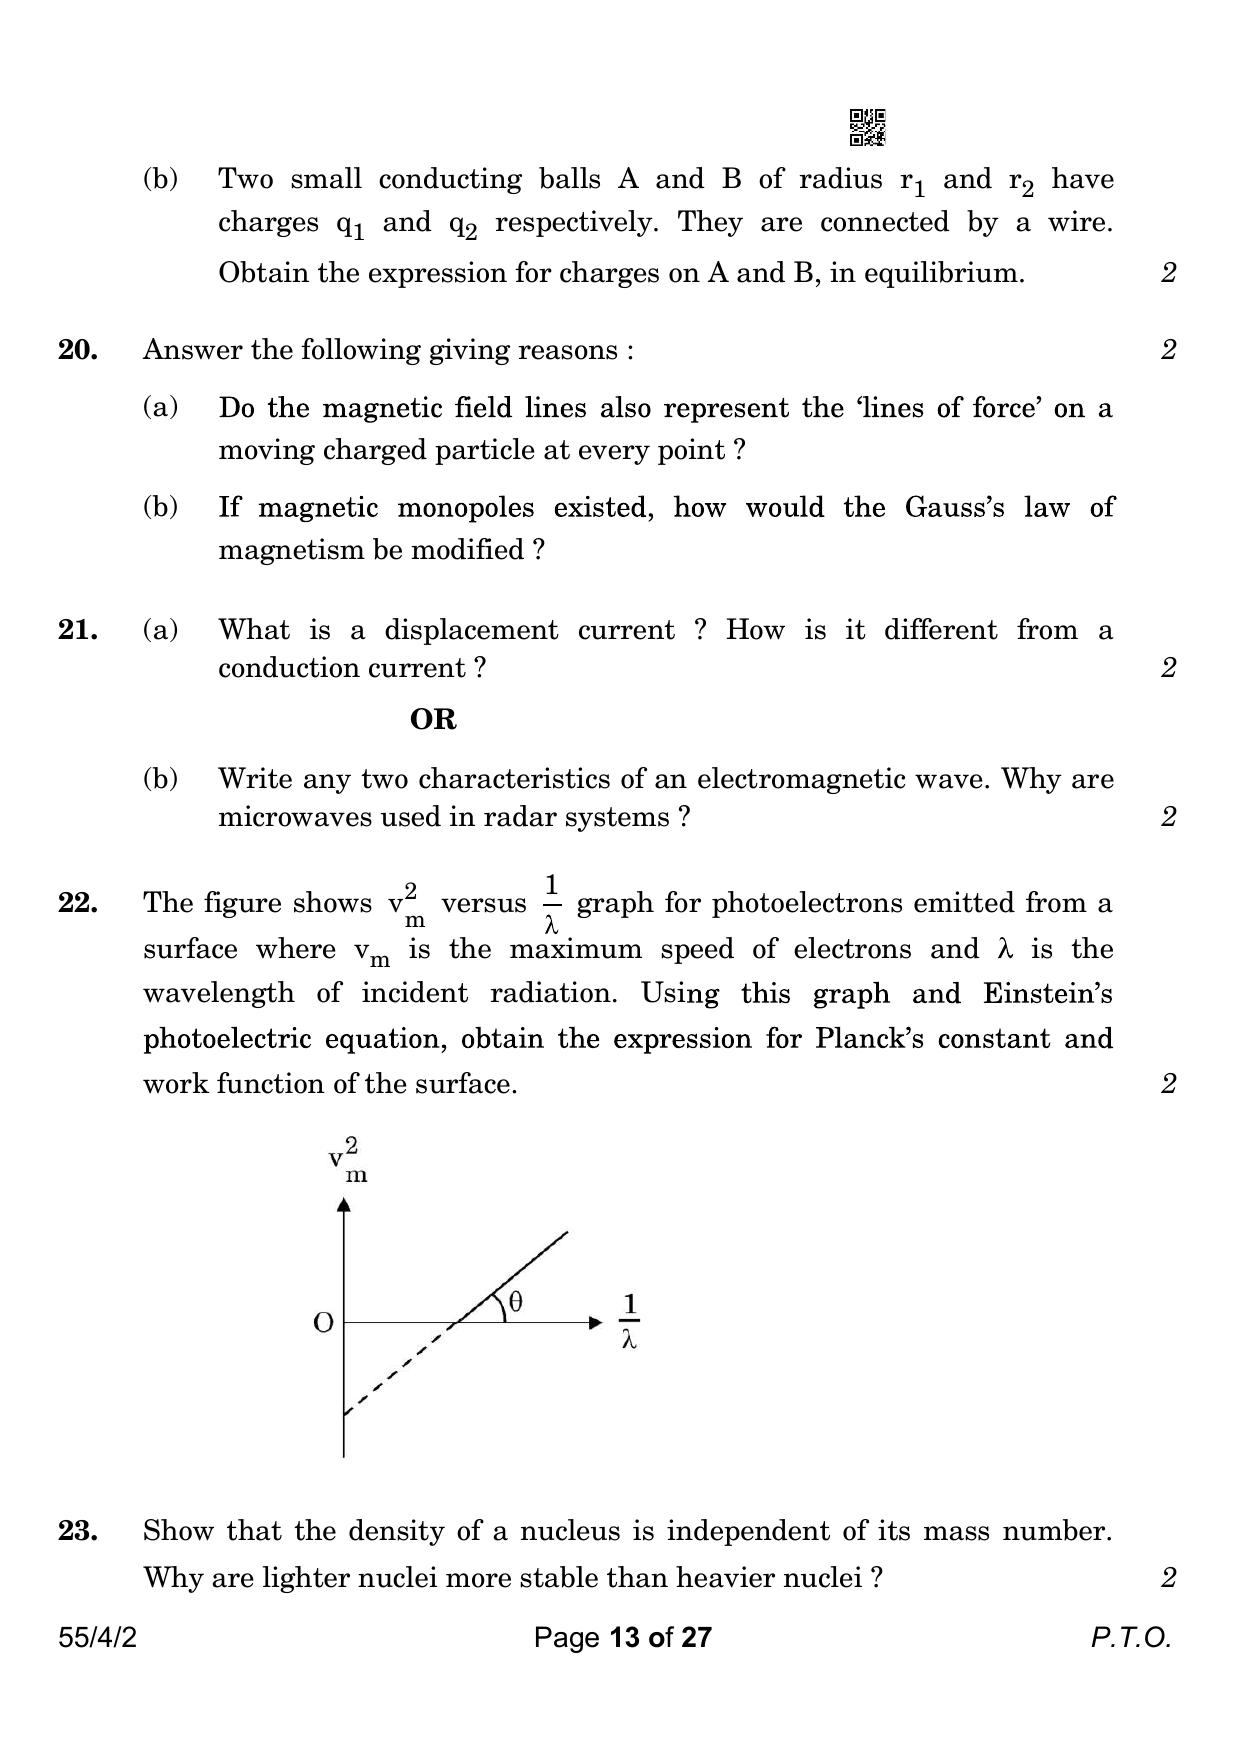 CBSE Class 12 55-4-2 Physics 2023 Question Paper - Page 13